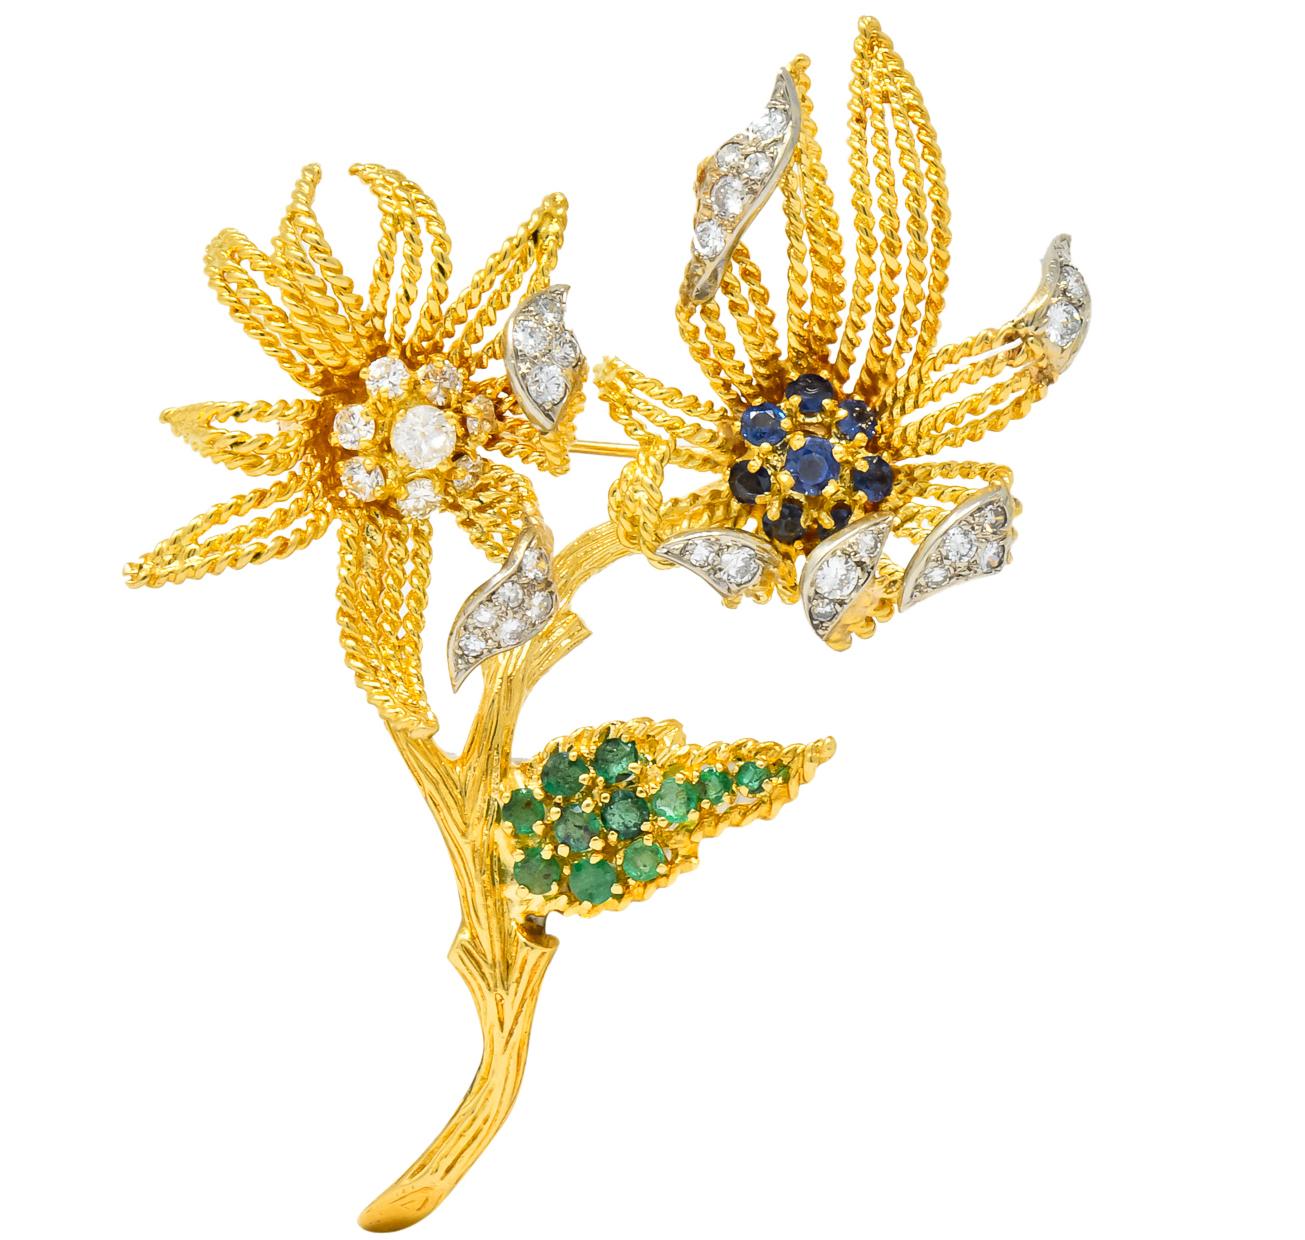 With twisted gold wire flowers petals and leaves and textured gold stem 

One centering round cut sapphires weighing approximately 0.70 carat, bright deep blue and very well matched

Leaf set with round cut emeralds, weighing approximately 0.70